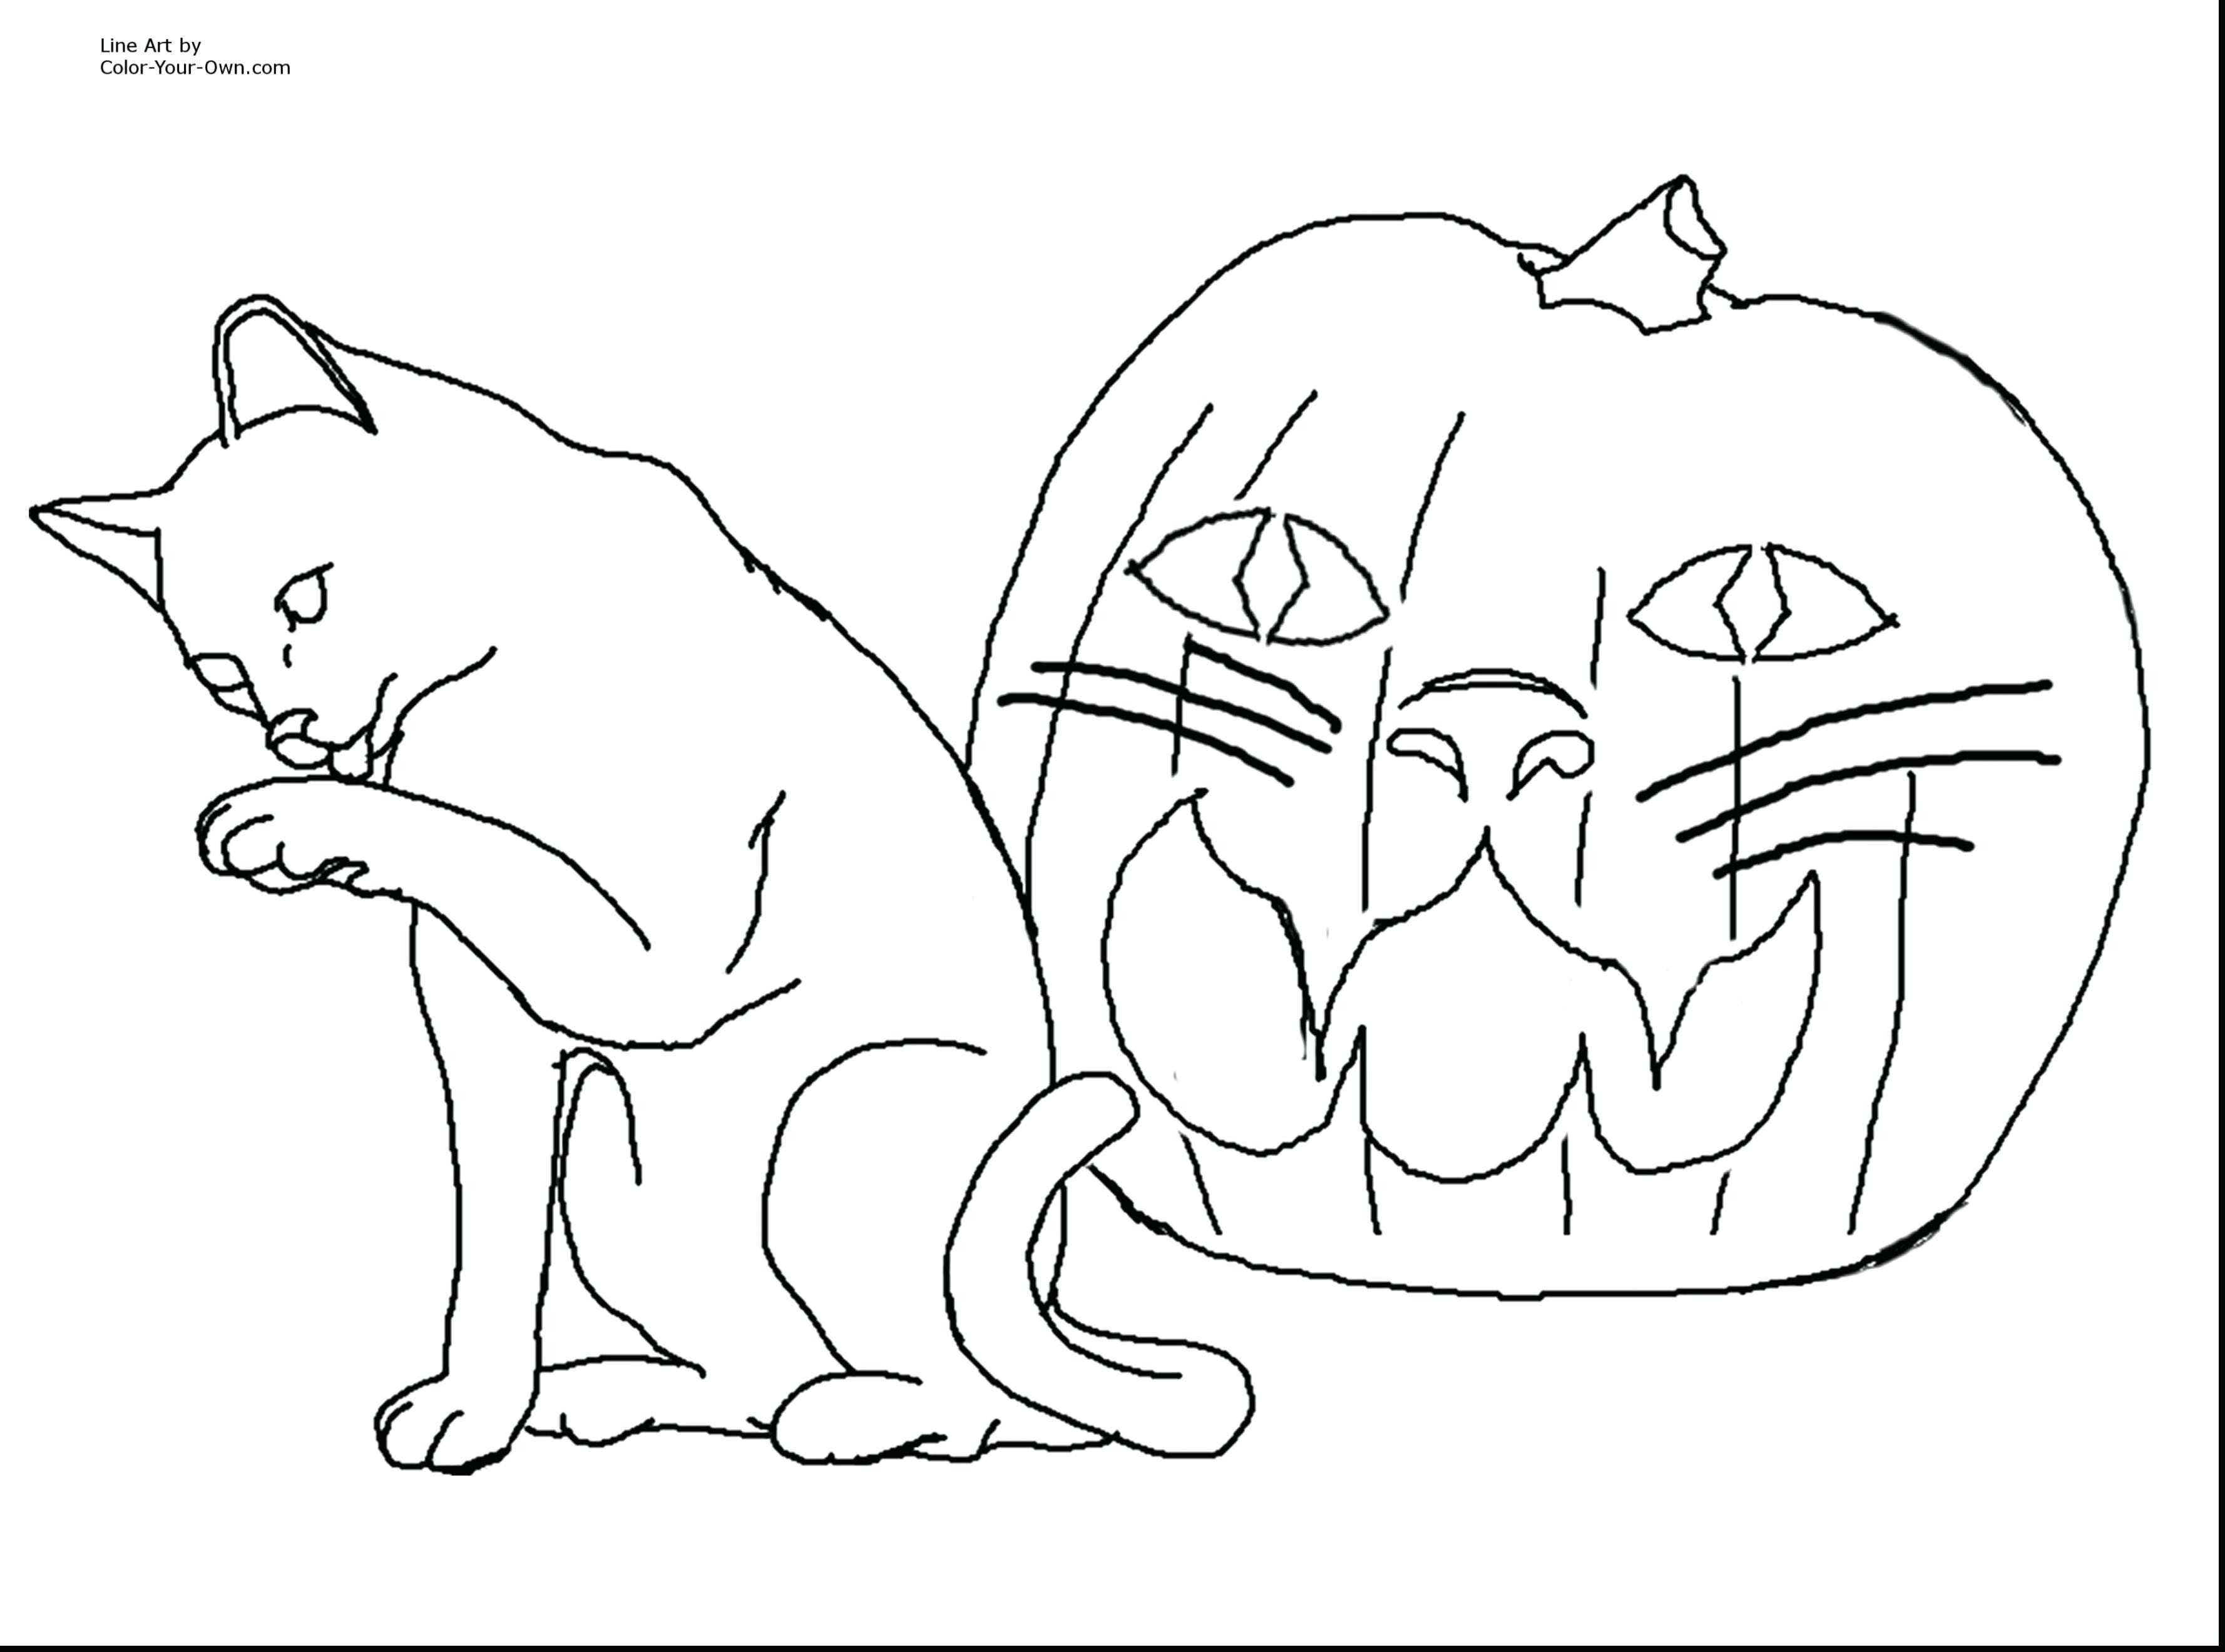 Cat and Pumpkin Coloring Page New Awesome Animal Coloring Pages Pdf Stock